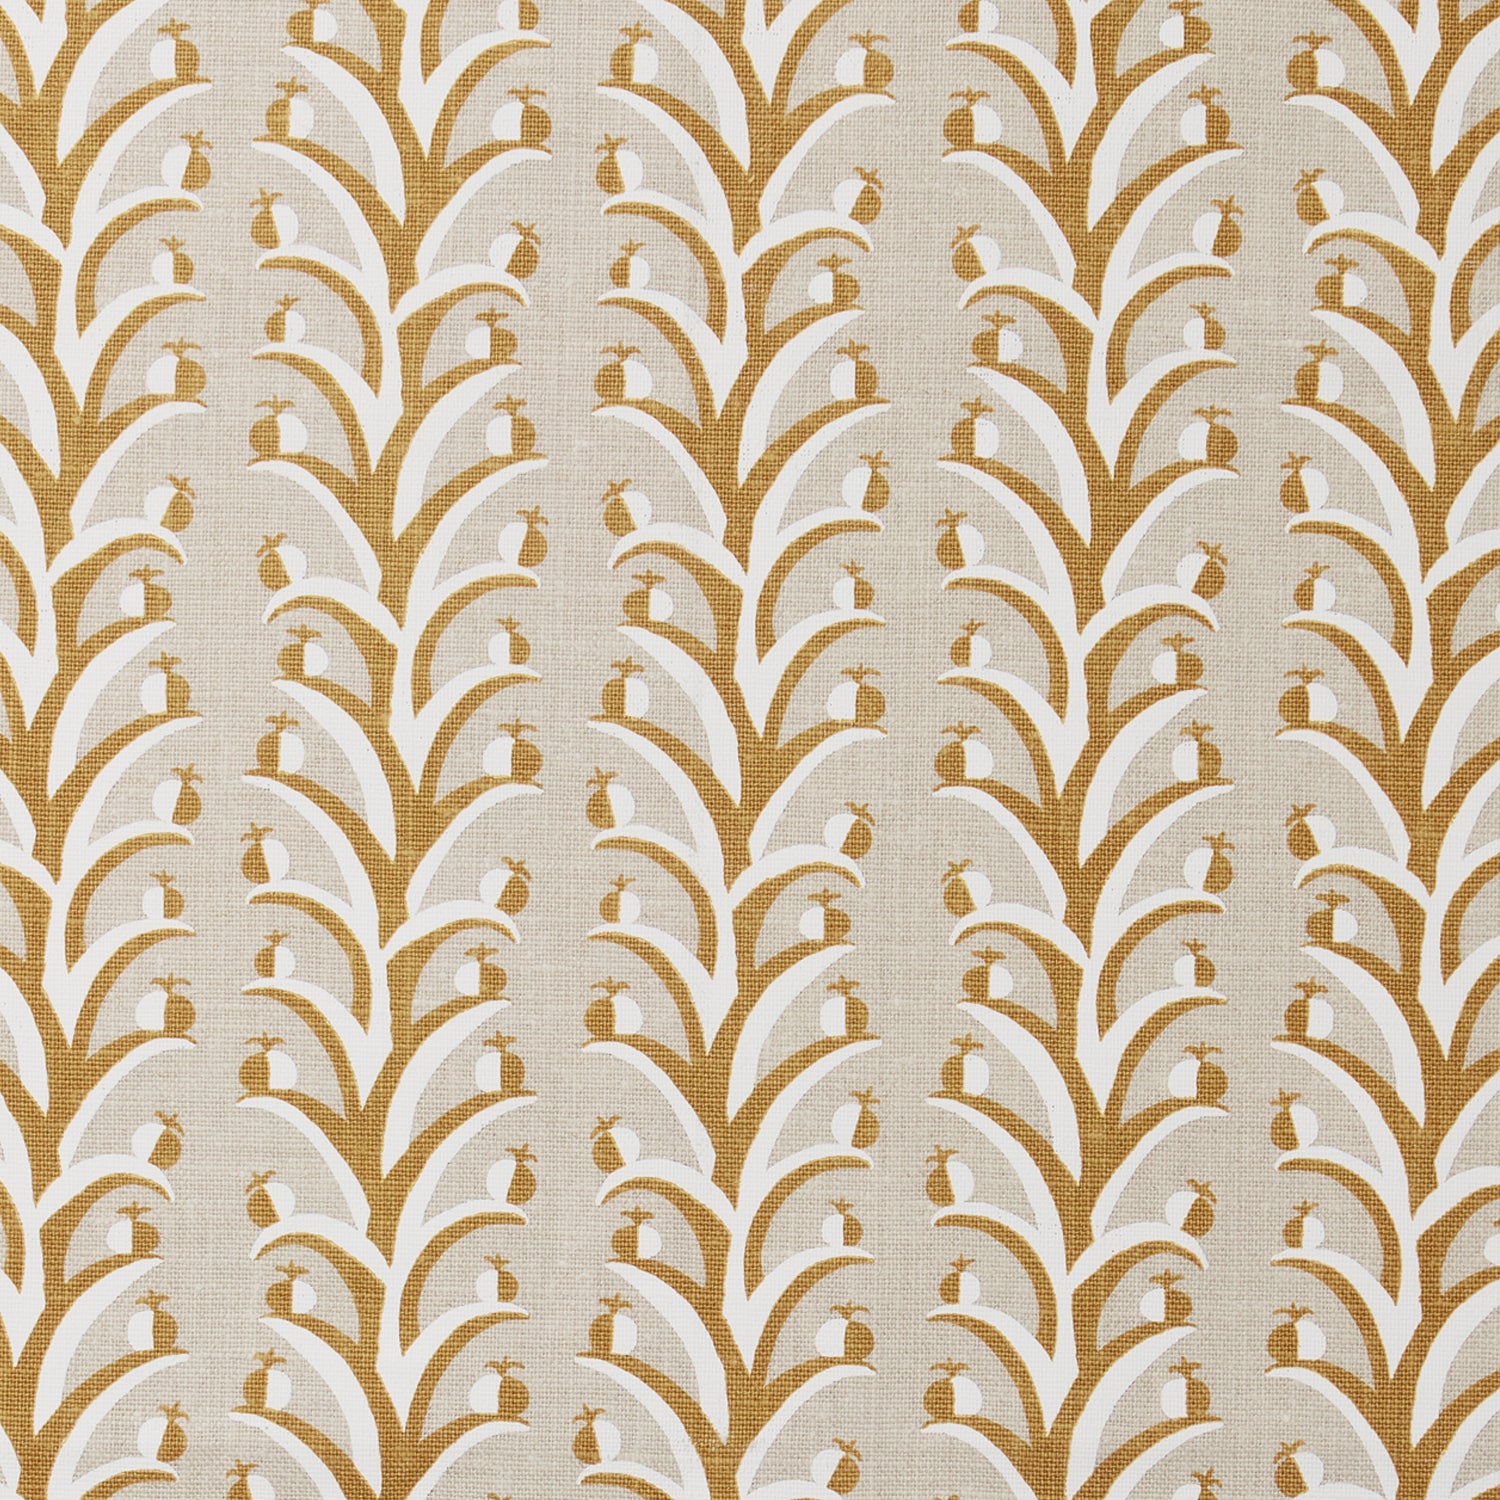 Fabric swatch with a horizontal striped pattern of curved branches topped with tiny fruits, in shades of tan, cream and white.